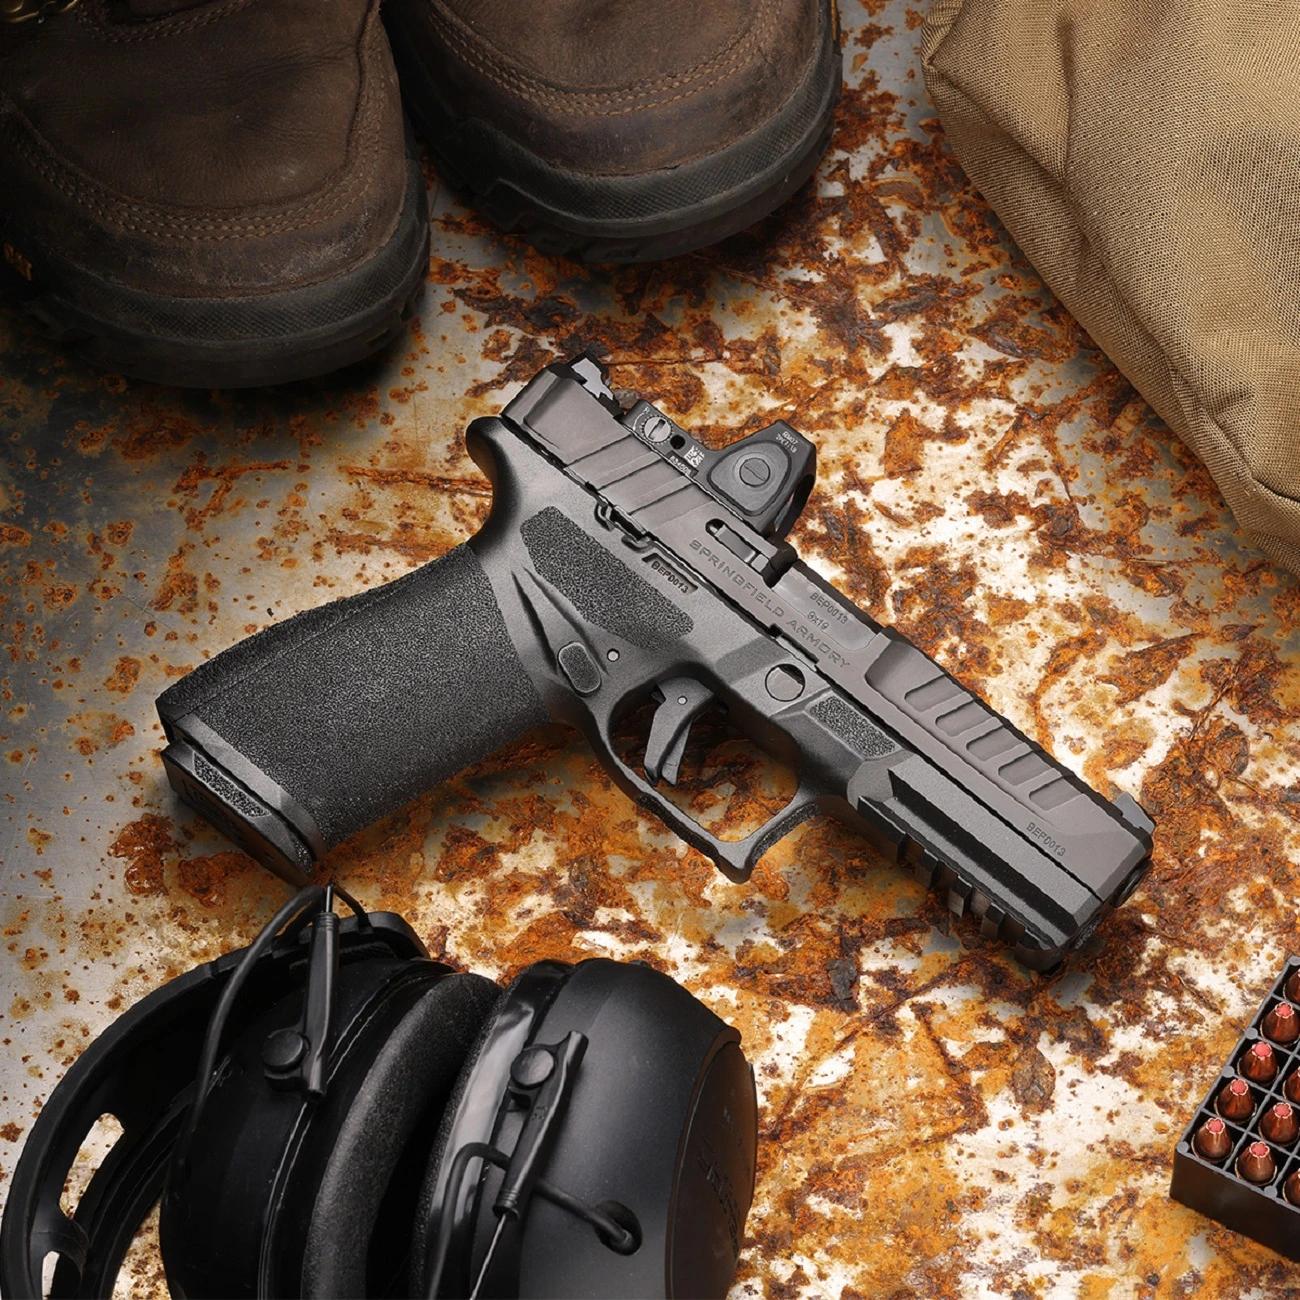 SA's Echelon uses a echassis pistol system similar to the Steyr M9 and SIG P250/P320.